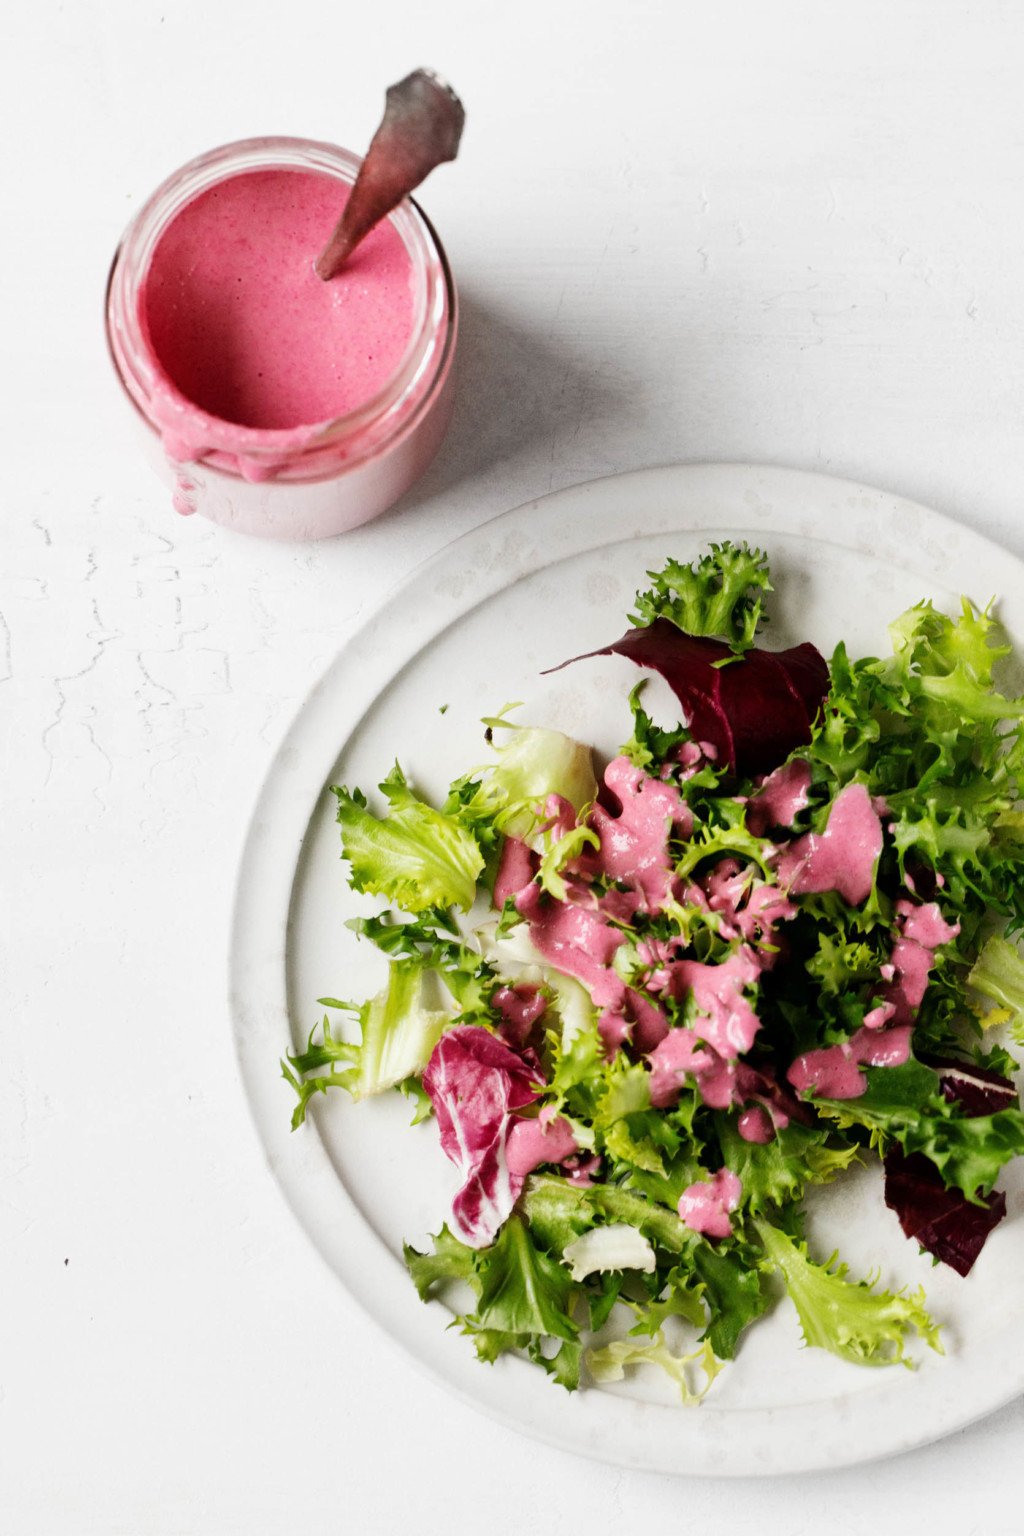 A bed of greens has been dressed with a plant-based, bright pink salad dressing.